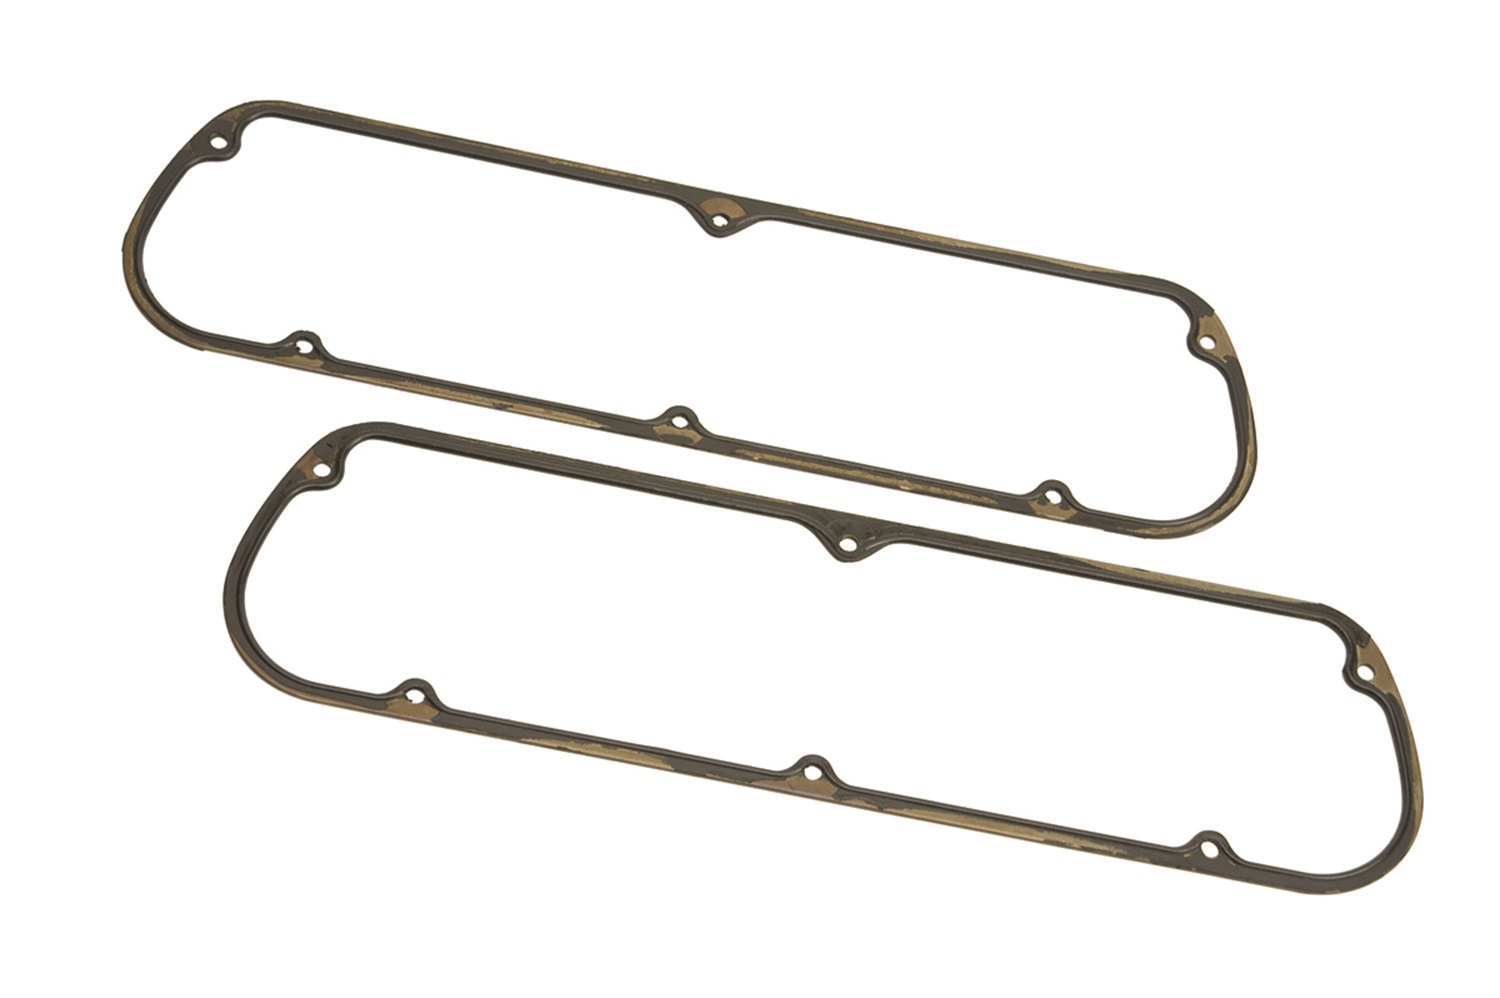 Ford Racing Ford Racing M-6584-A50 Valve Cover Gasket Set